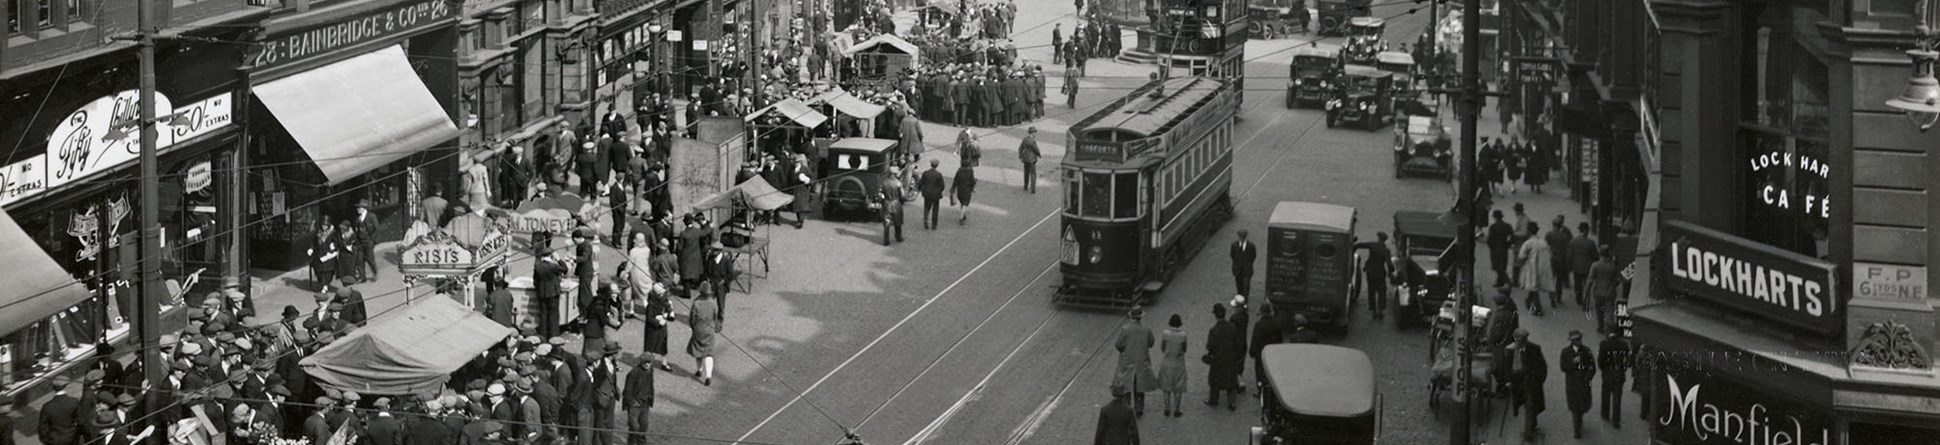 Black and white photo of a busy street scene 1925-1930.